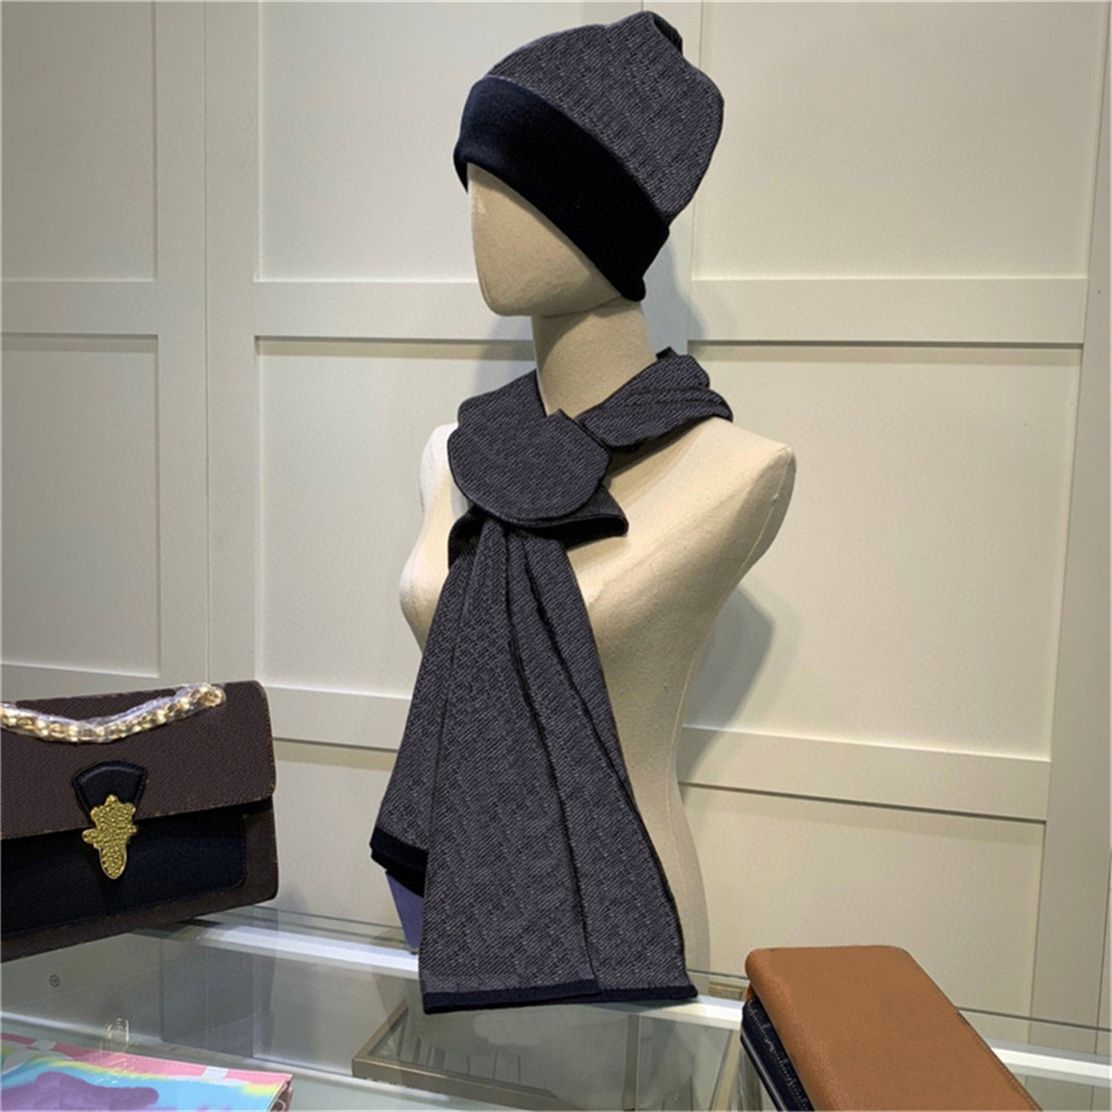 Luxury Designer Winter Hat And Scarf Set For Men And Women High Quality  Caps And Shawl With Wool Beanie Wrap Matching Hat And Scarf In A Stylish  Box From Baseball99, $8.57